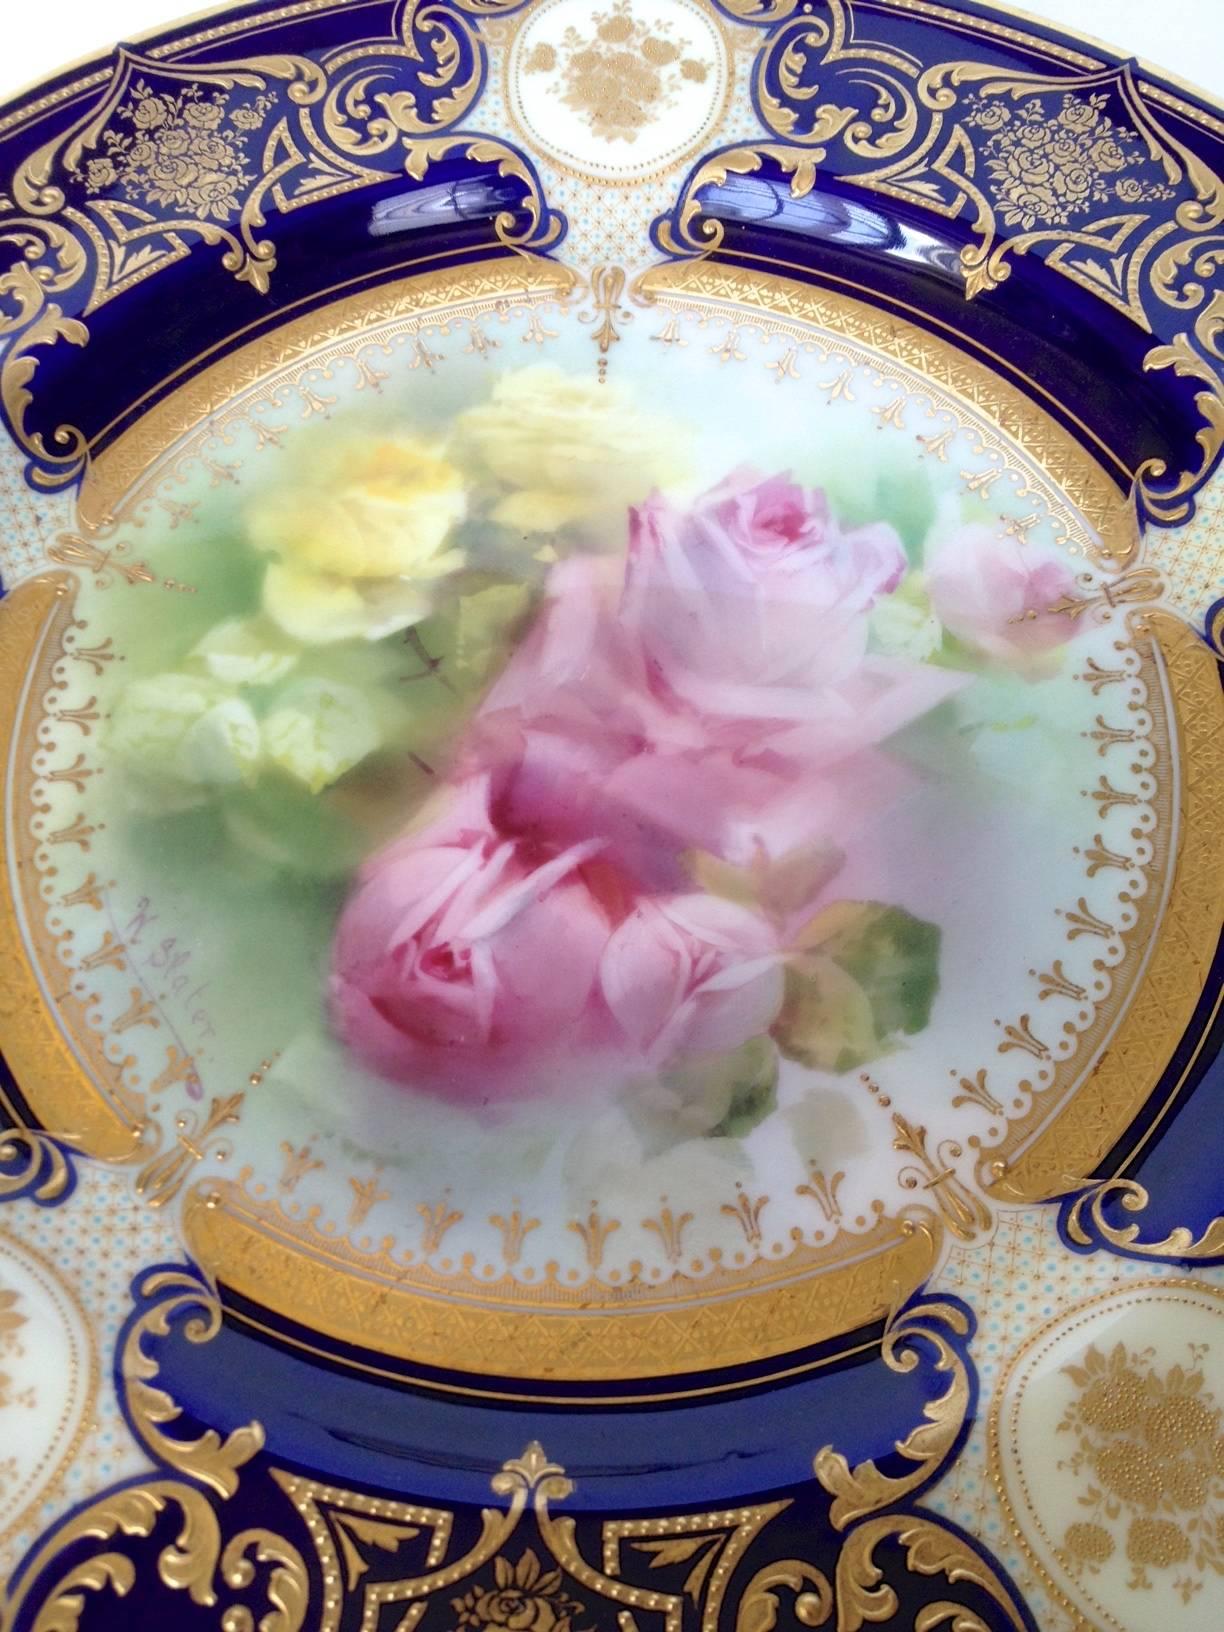 Early 20th Century Antique Royal Doulton Rose Plates Signed W. Slater, circa 1920s, Hand-Painted For Sale